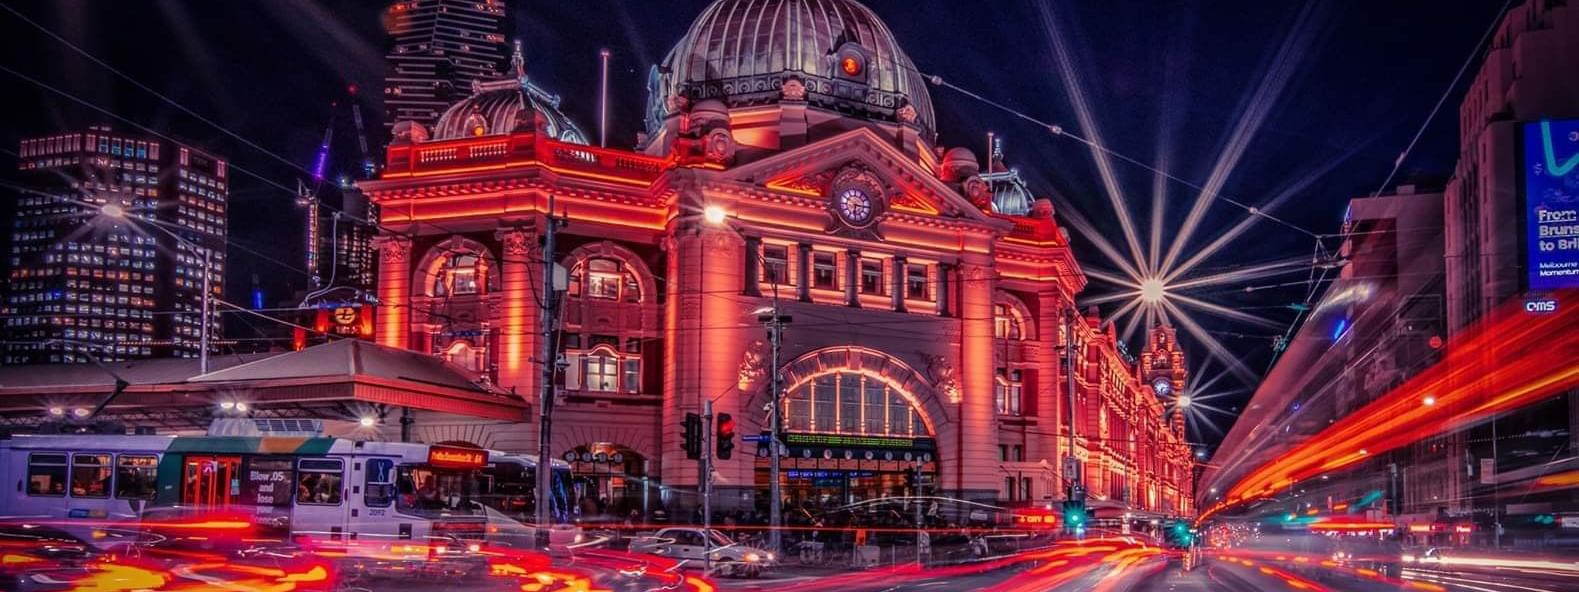 flinders street station at night nearby Mercure Welcome Hotel Melbourne